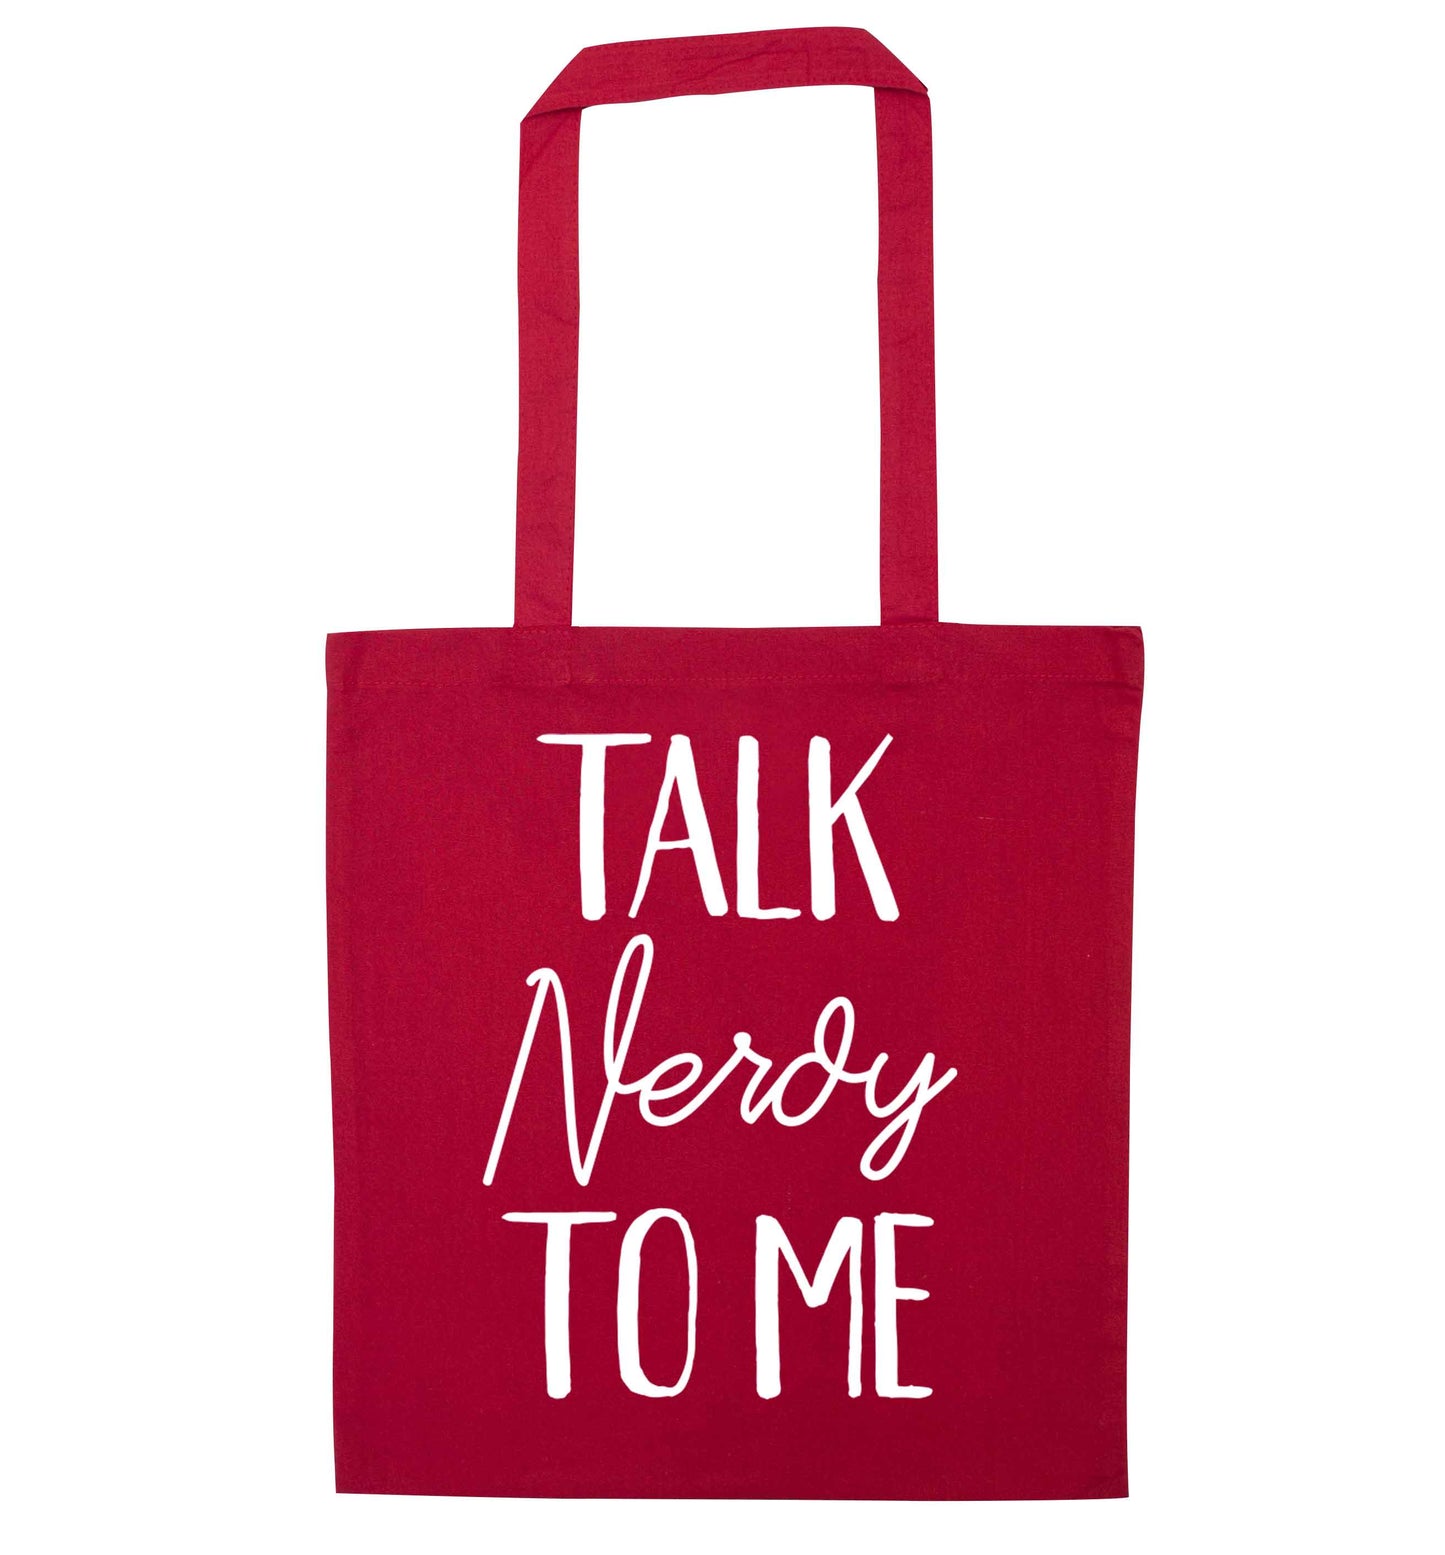 Talk nerdy to me red tote bag